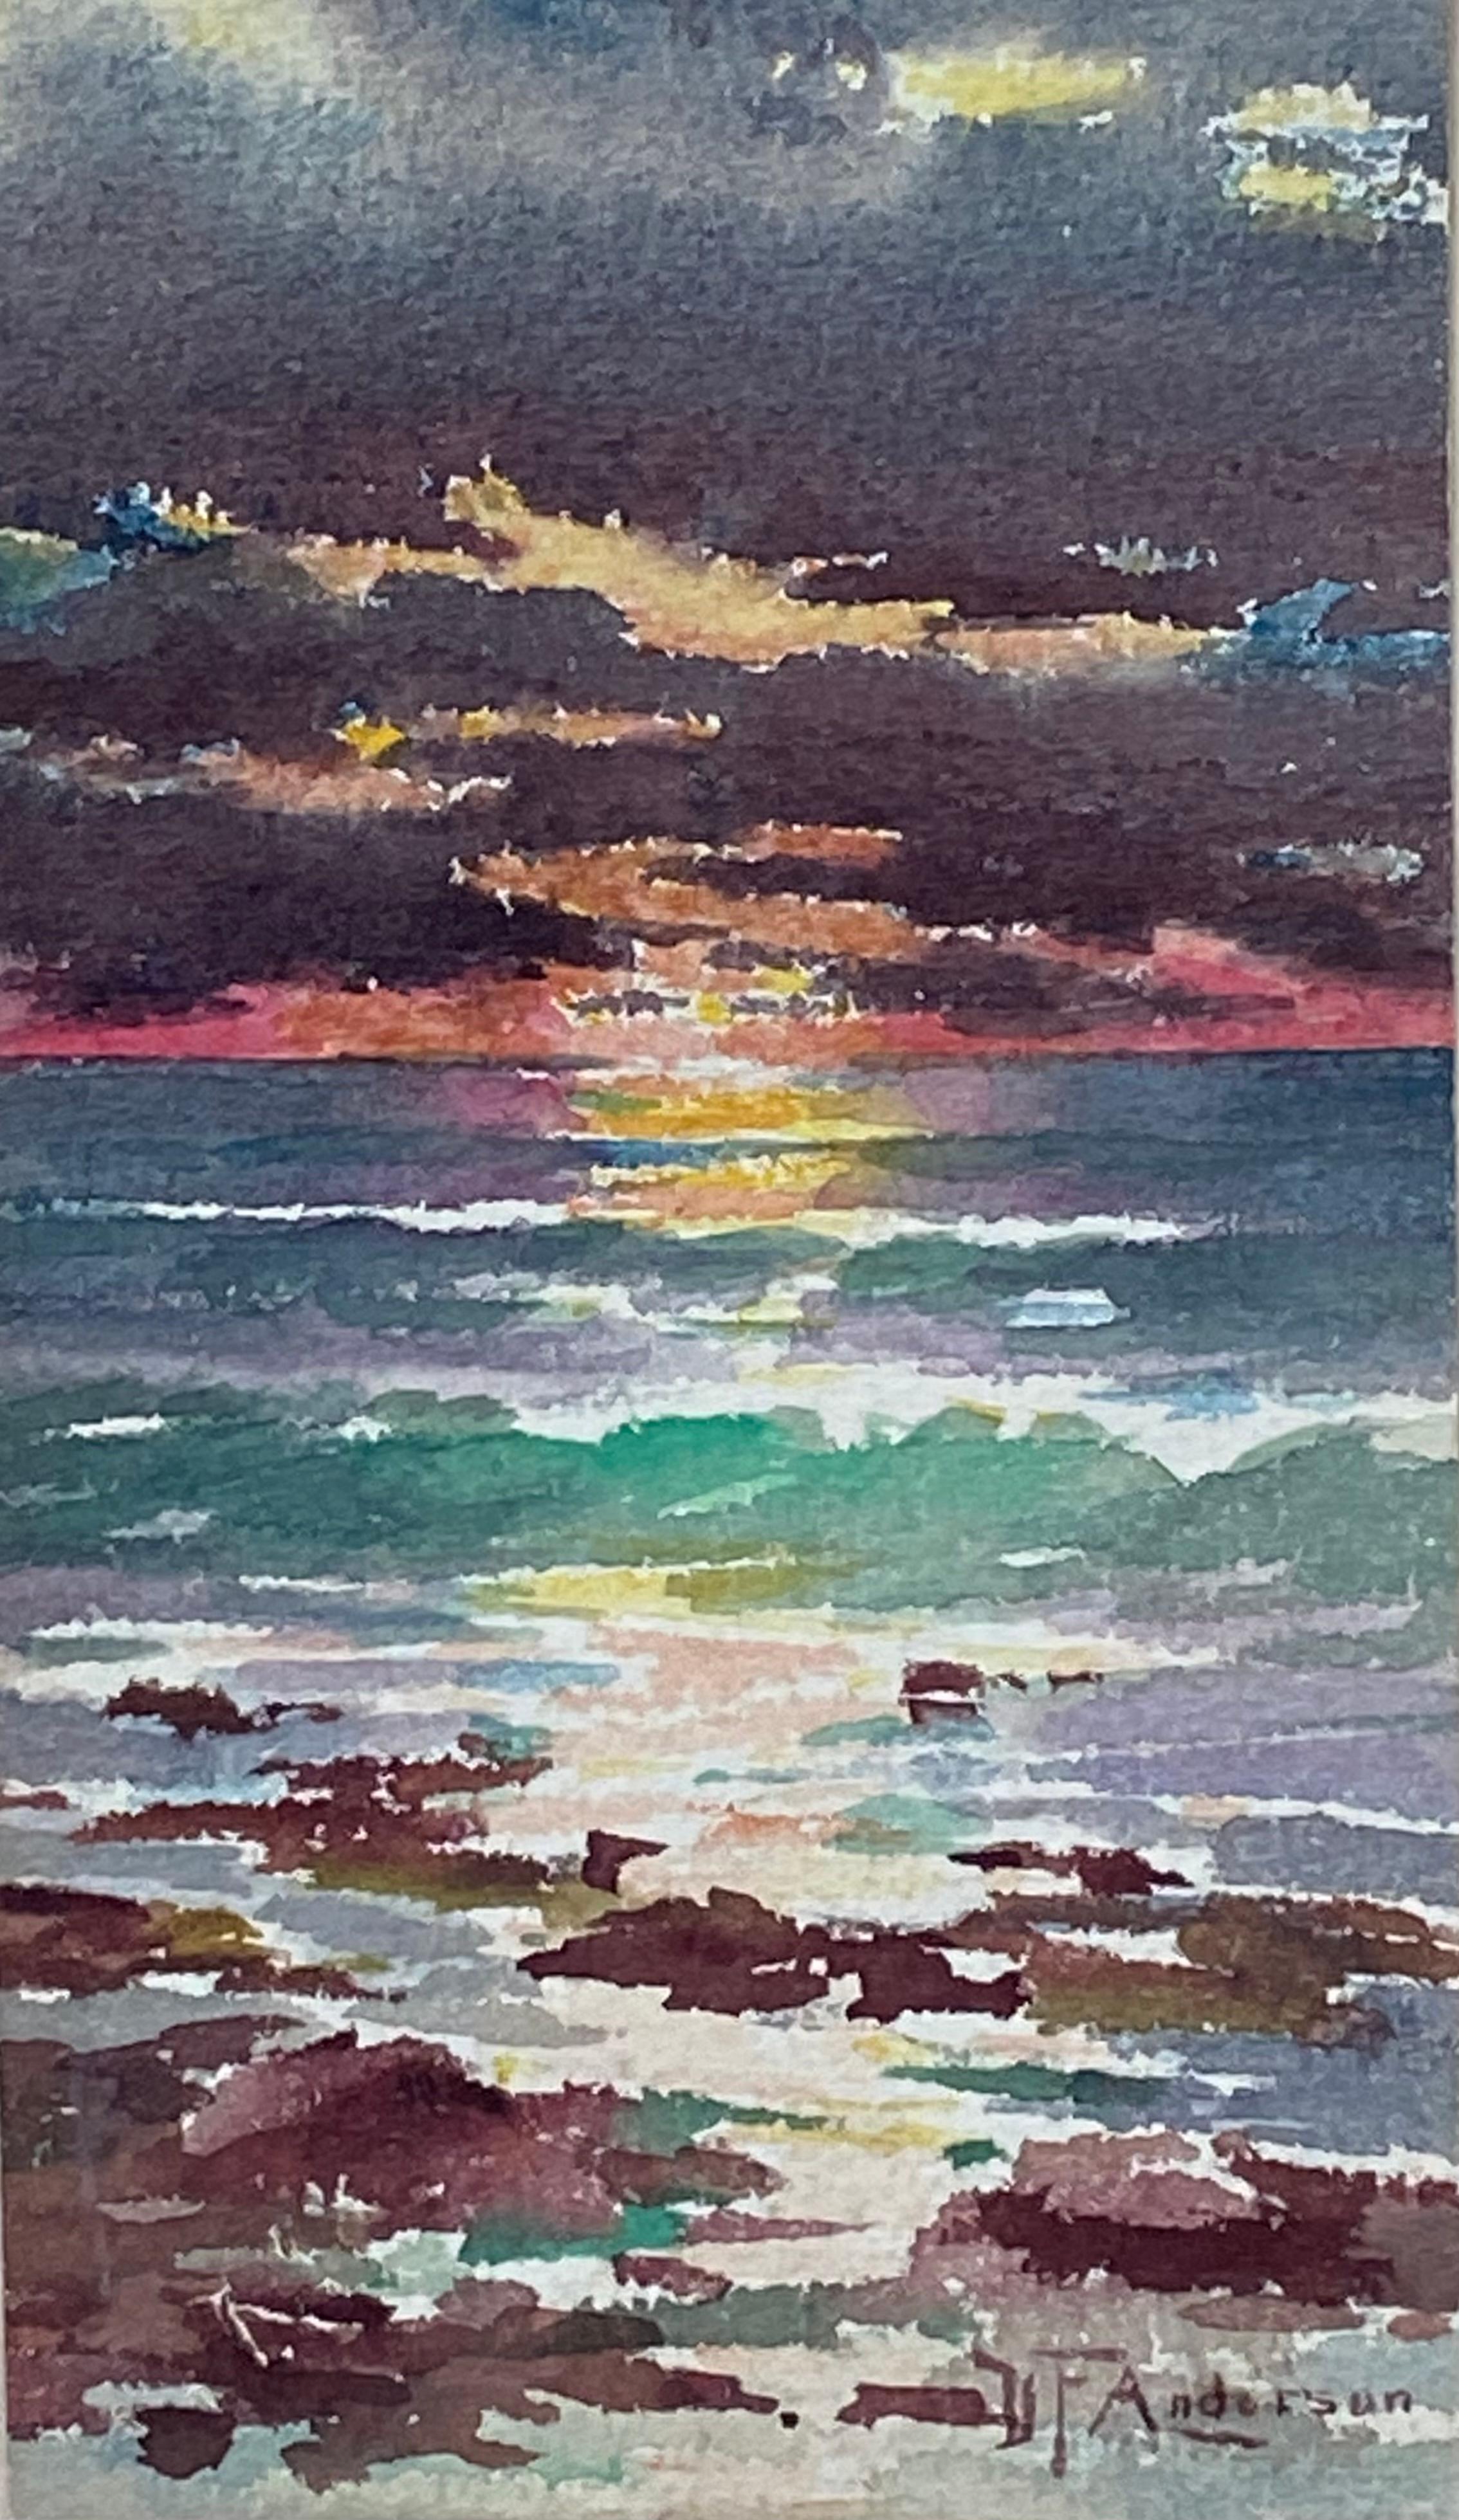 “Maine Sunset” - American Impressionist Art by Dougal F. Anderson 